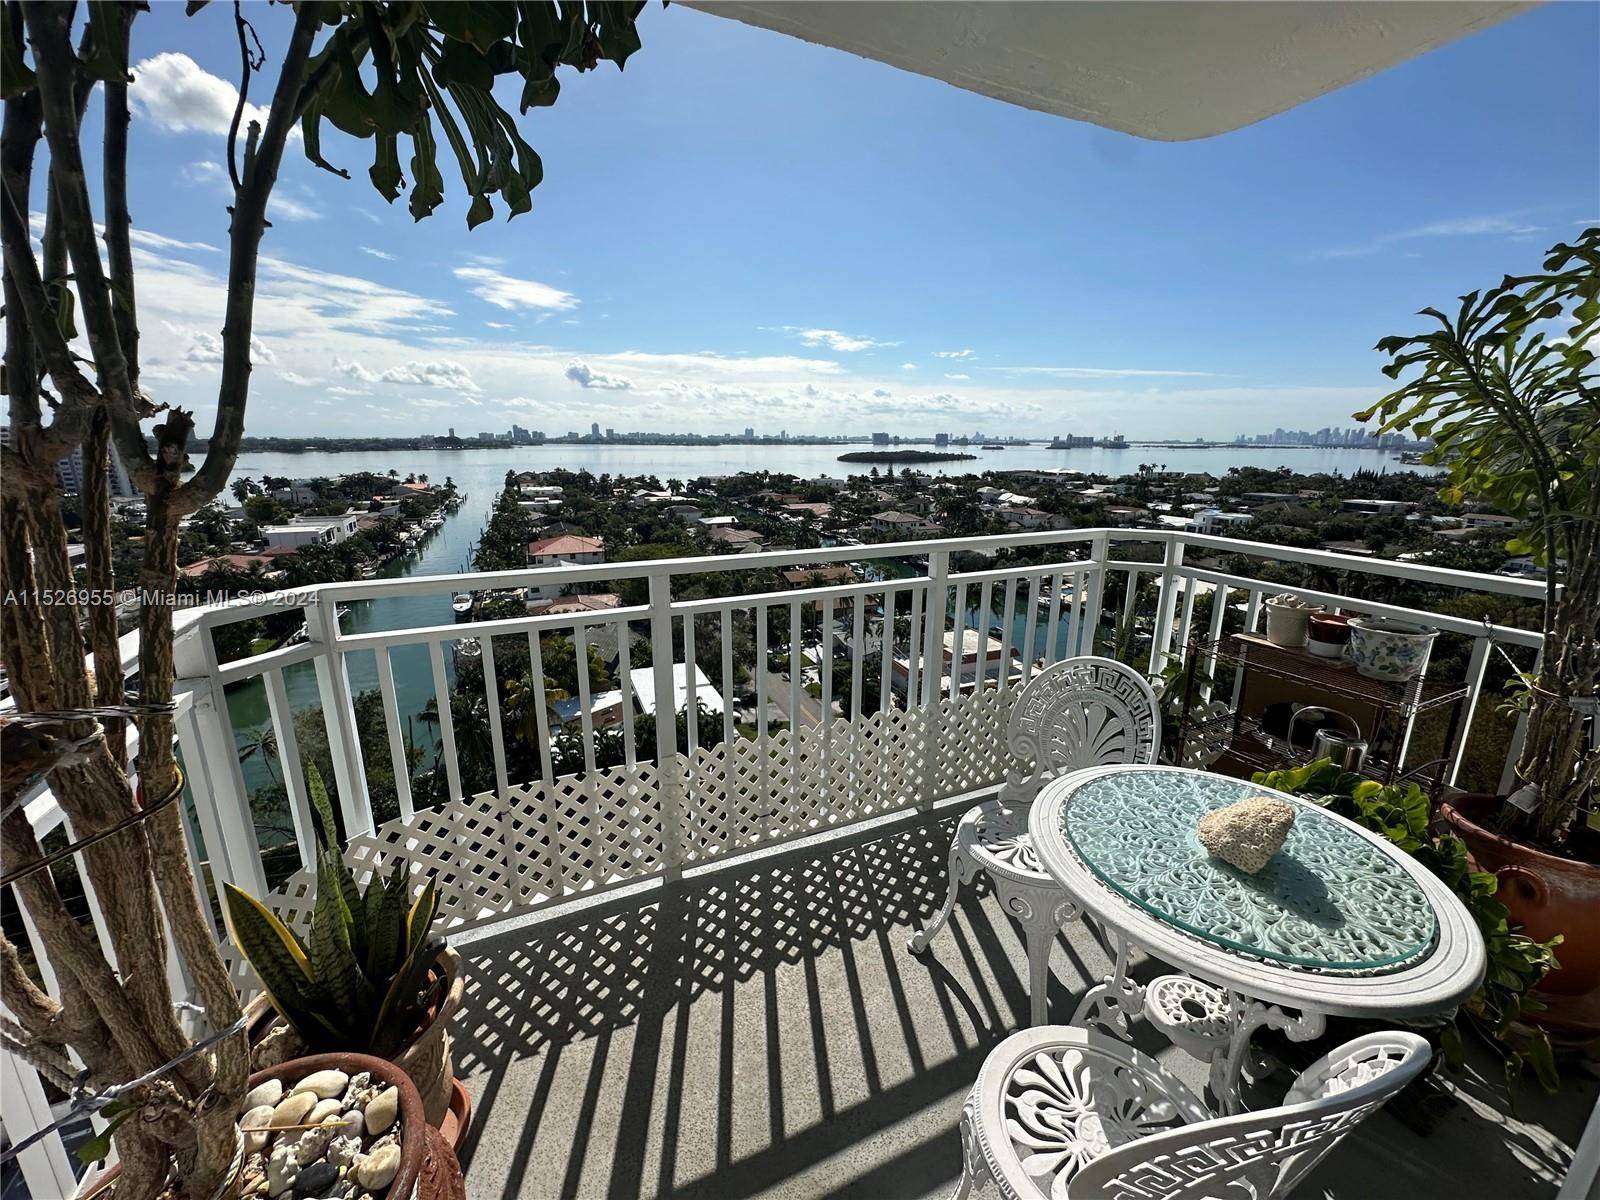 Fantastic two bedroom two bathroom condo on the 14th floor with amazing view of the ocean and Miami's skyline.